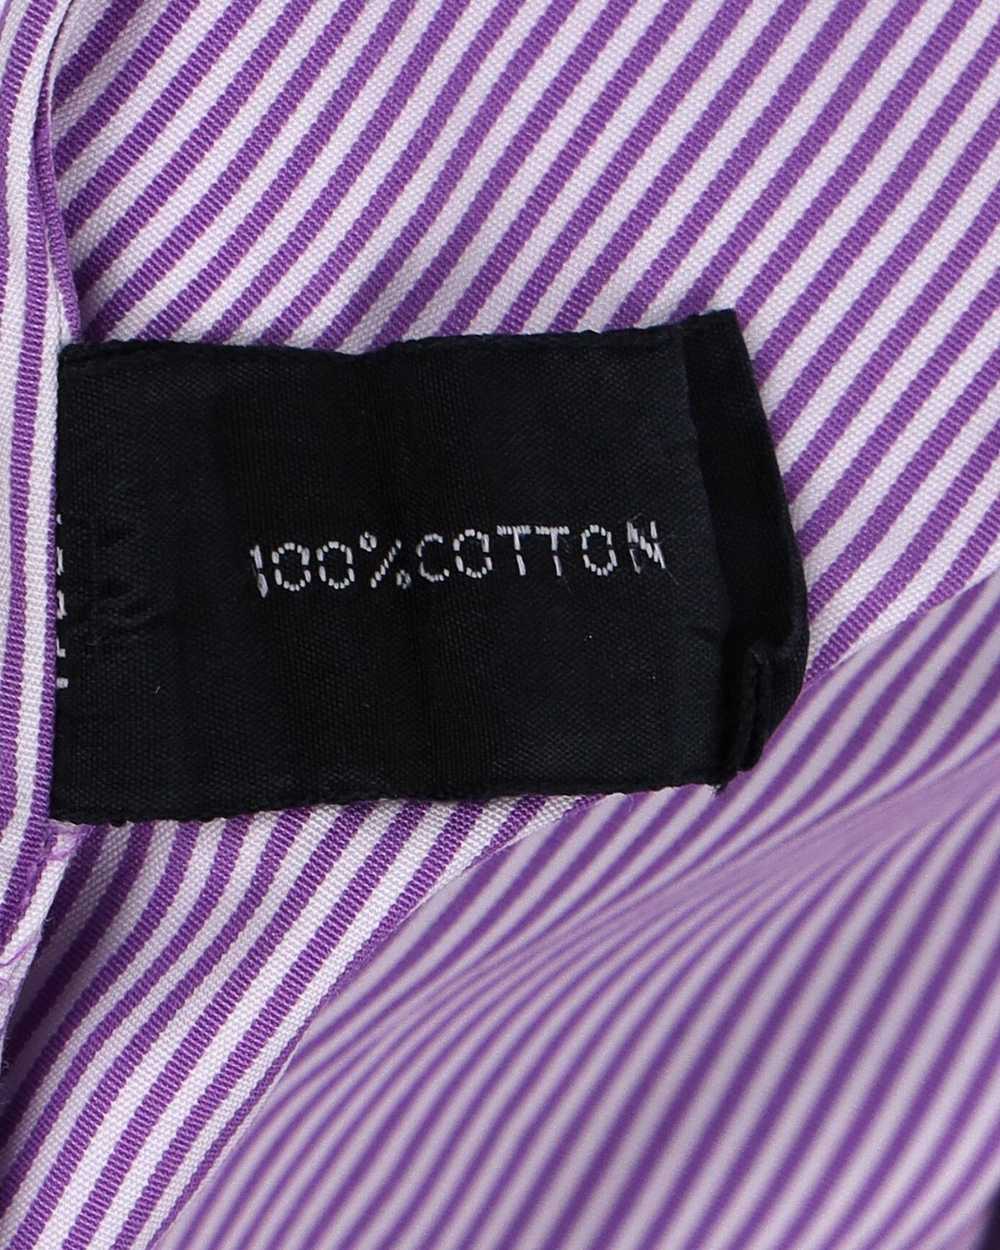 Tom Ford Striped Cotton Shirt in Bold Purple - image 5